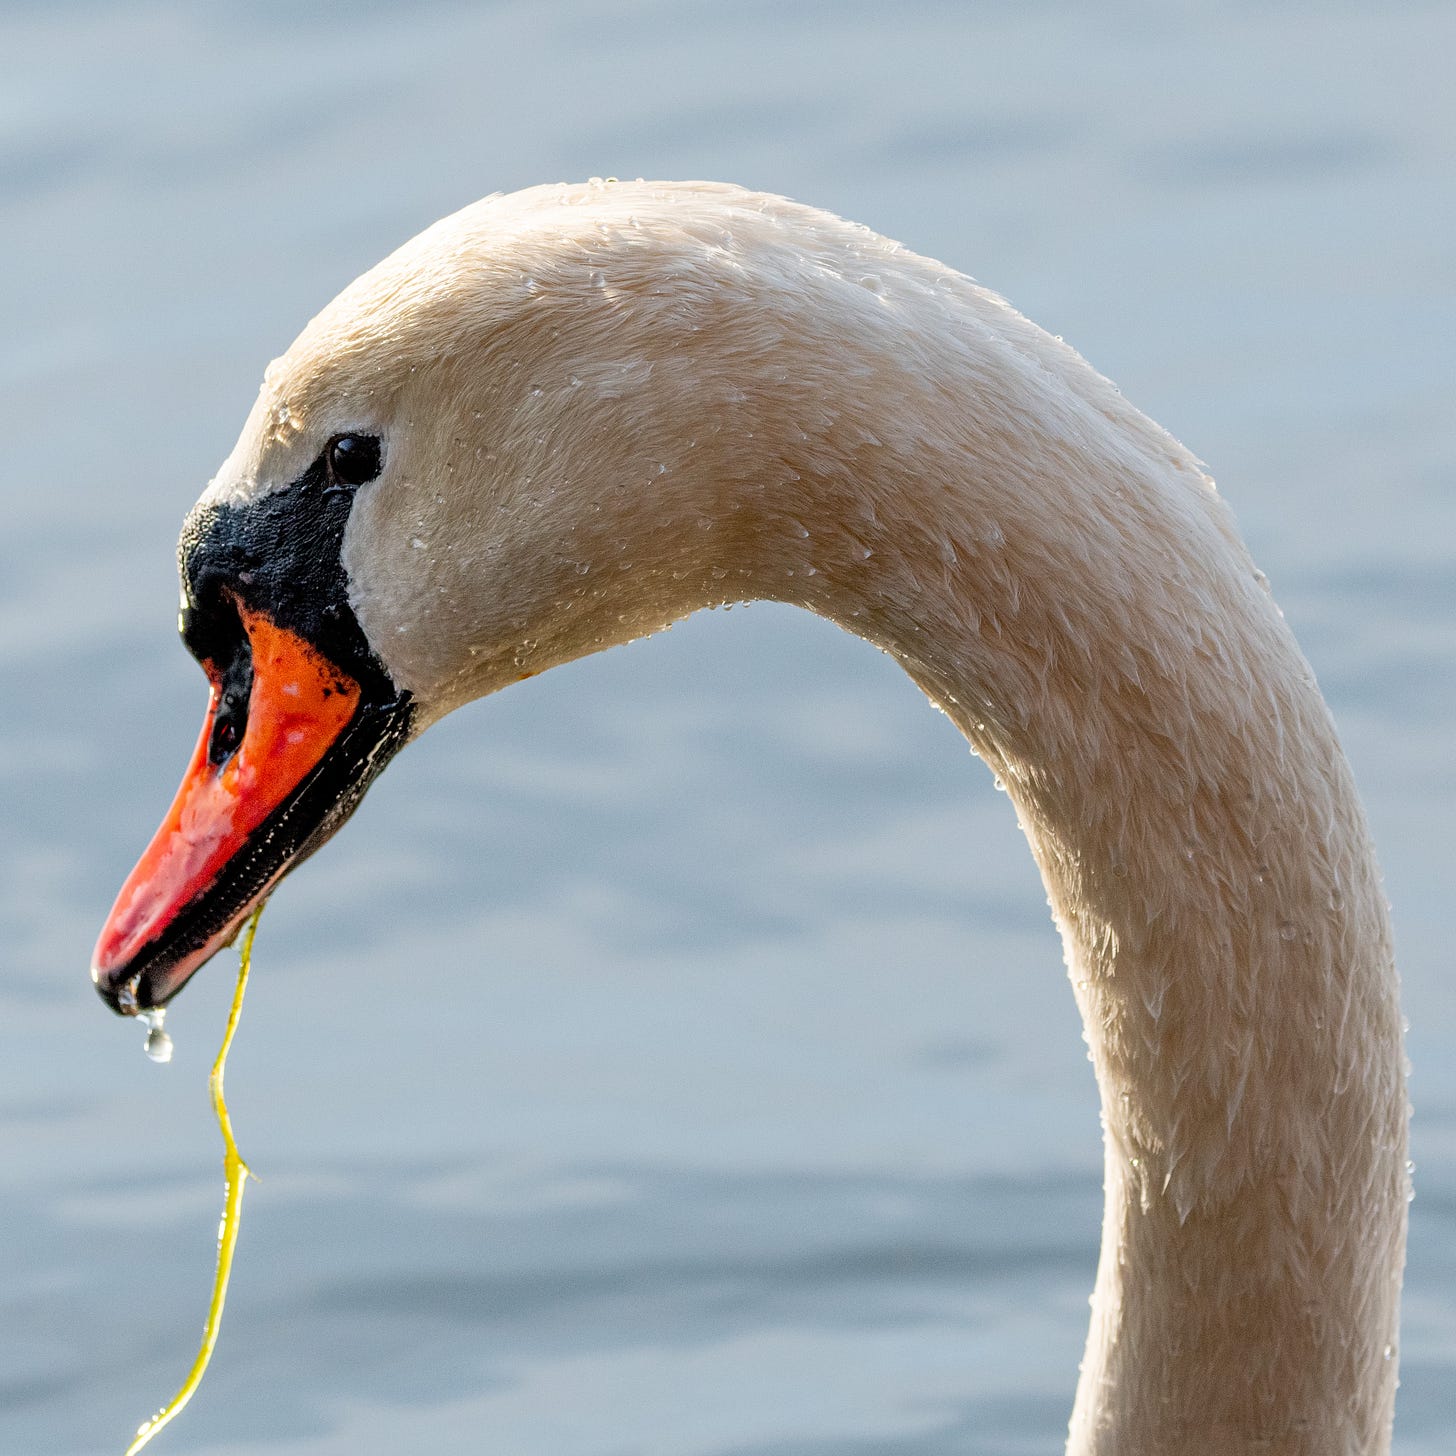 Close-up of the head of a swan, water dripping from its hazard-orange beak, a frond of plant matter dribbling from its mouth